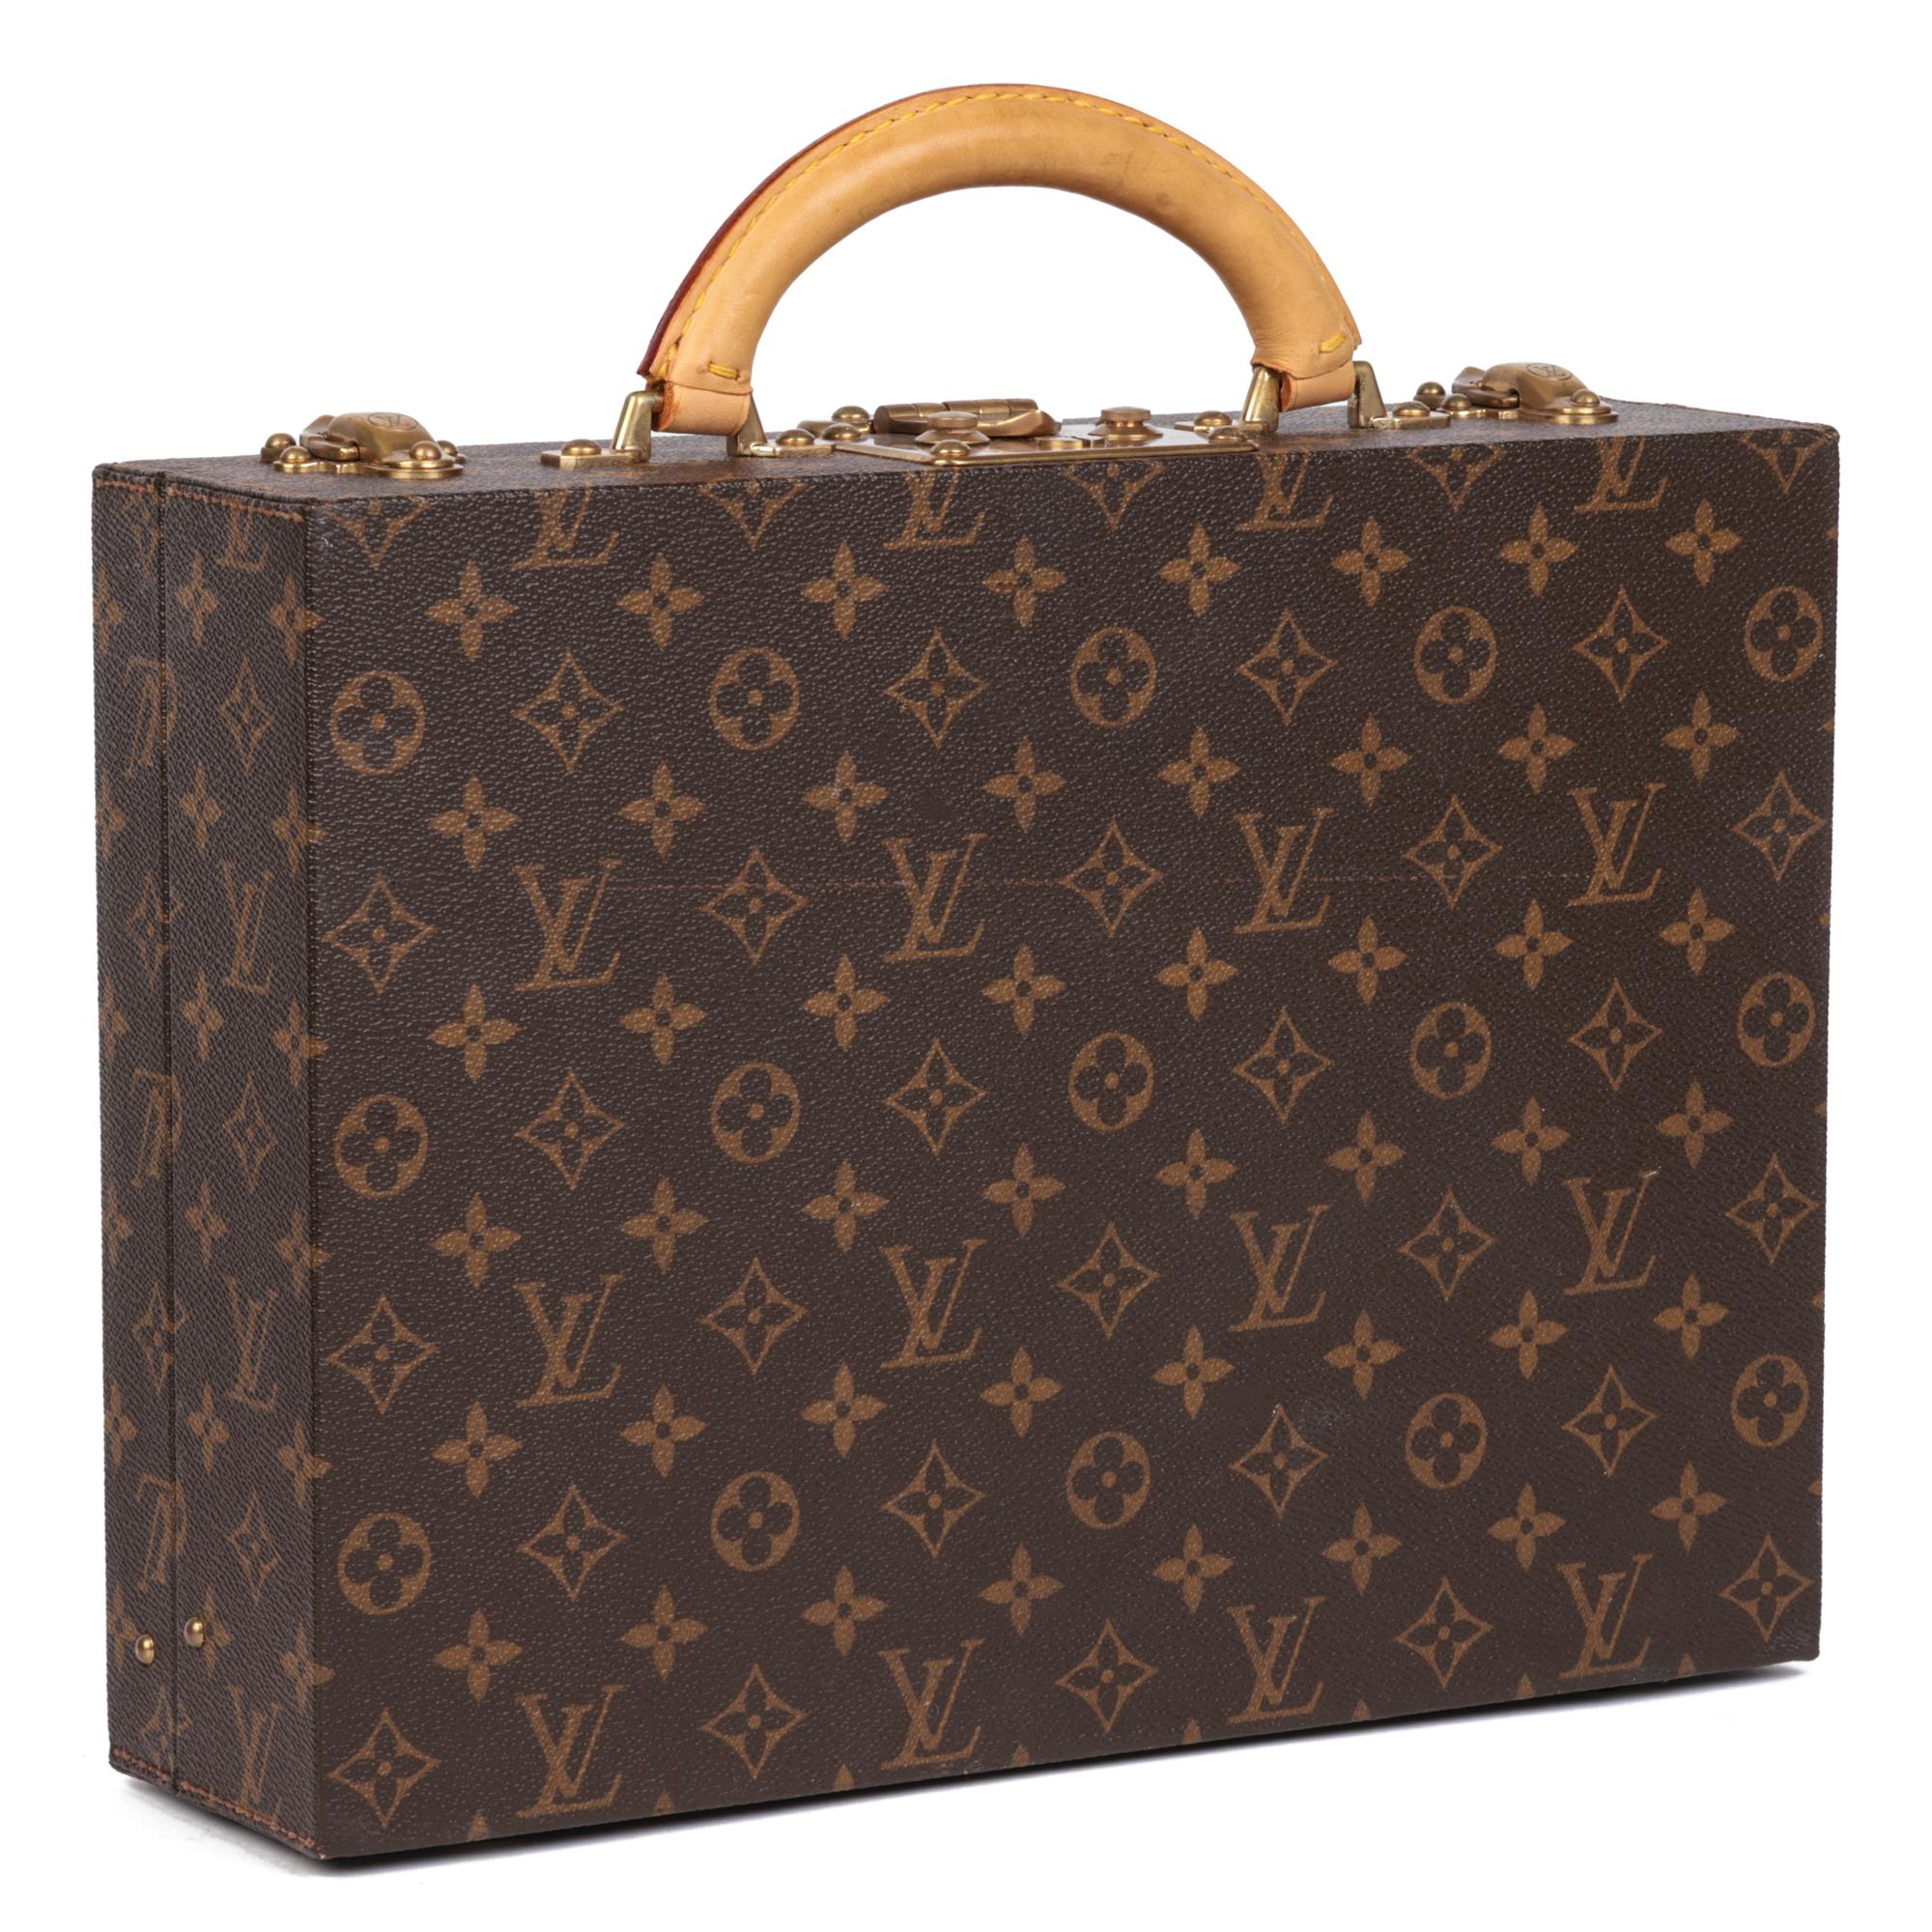 Louis Vuitton Brown Monogram Coated Canvas Jewellery Case

Product Details
The exterior is in good condition with light signs of wear throughout, with scratches on the leather parts.
The interior is in very good condition with light signs of